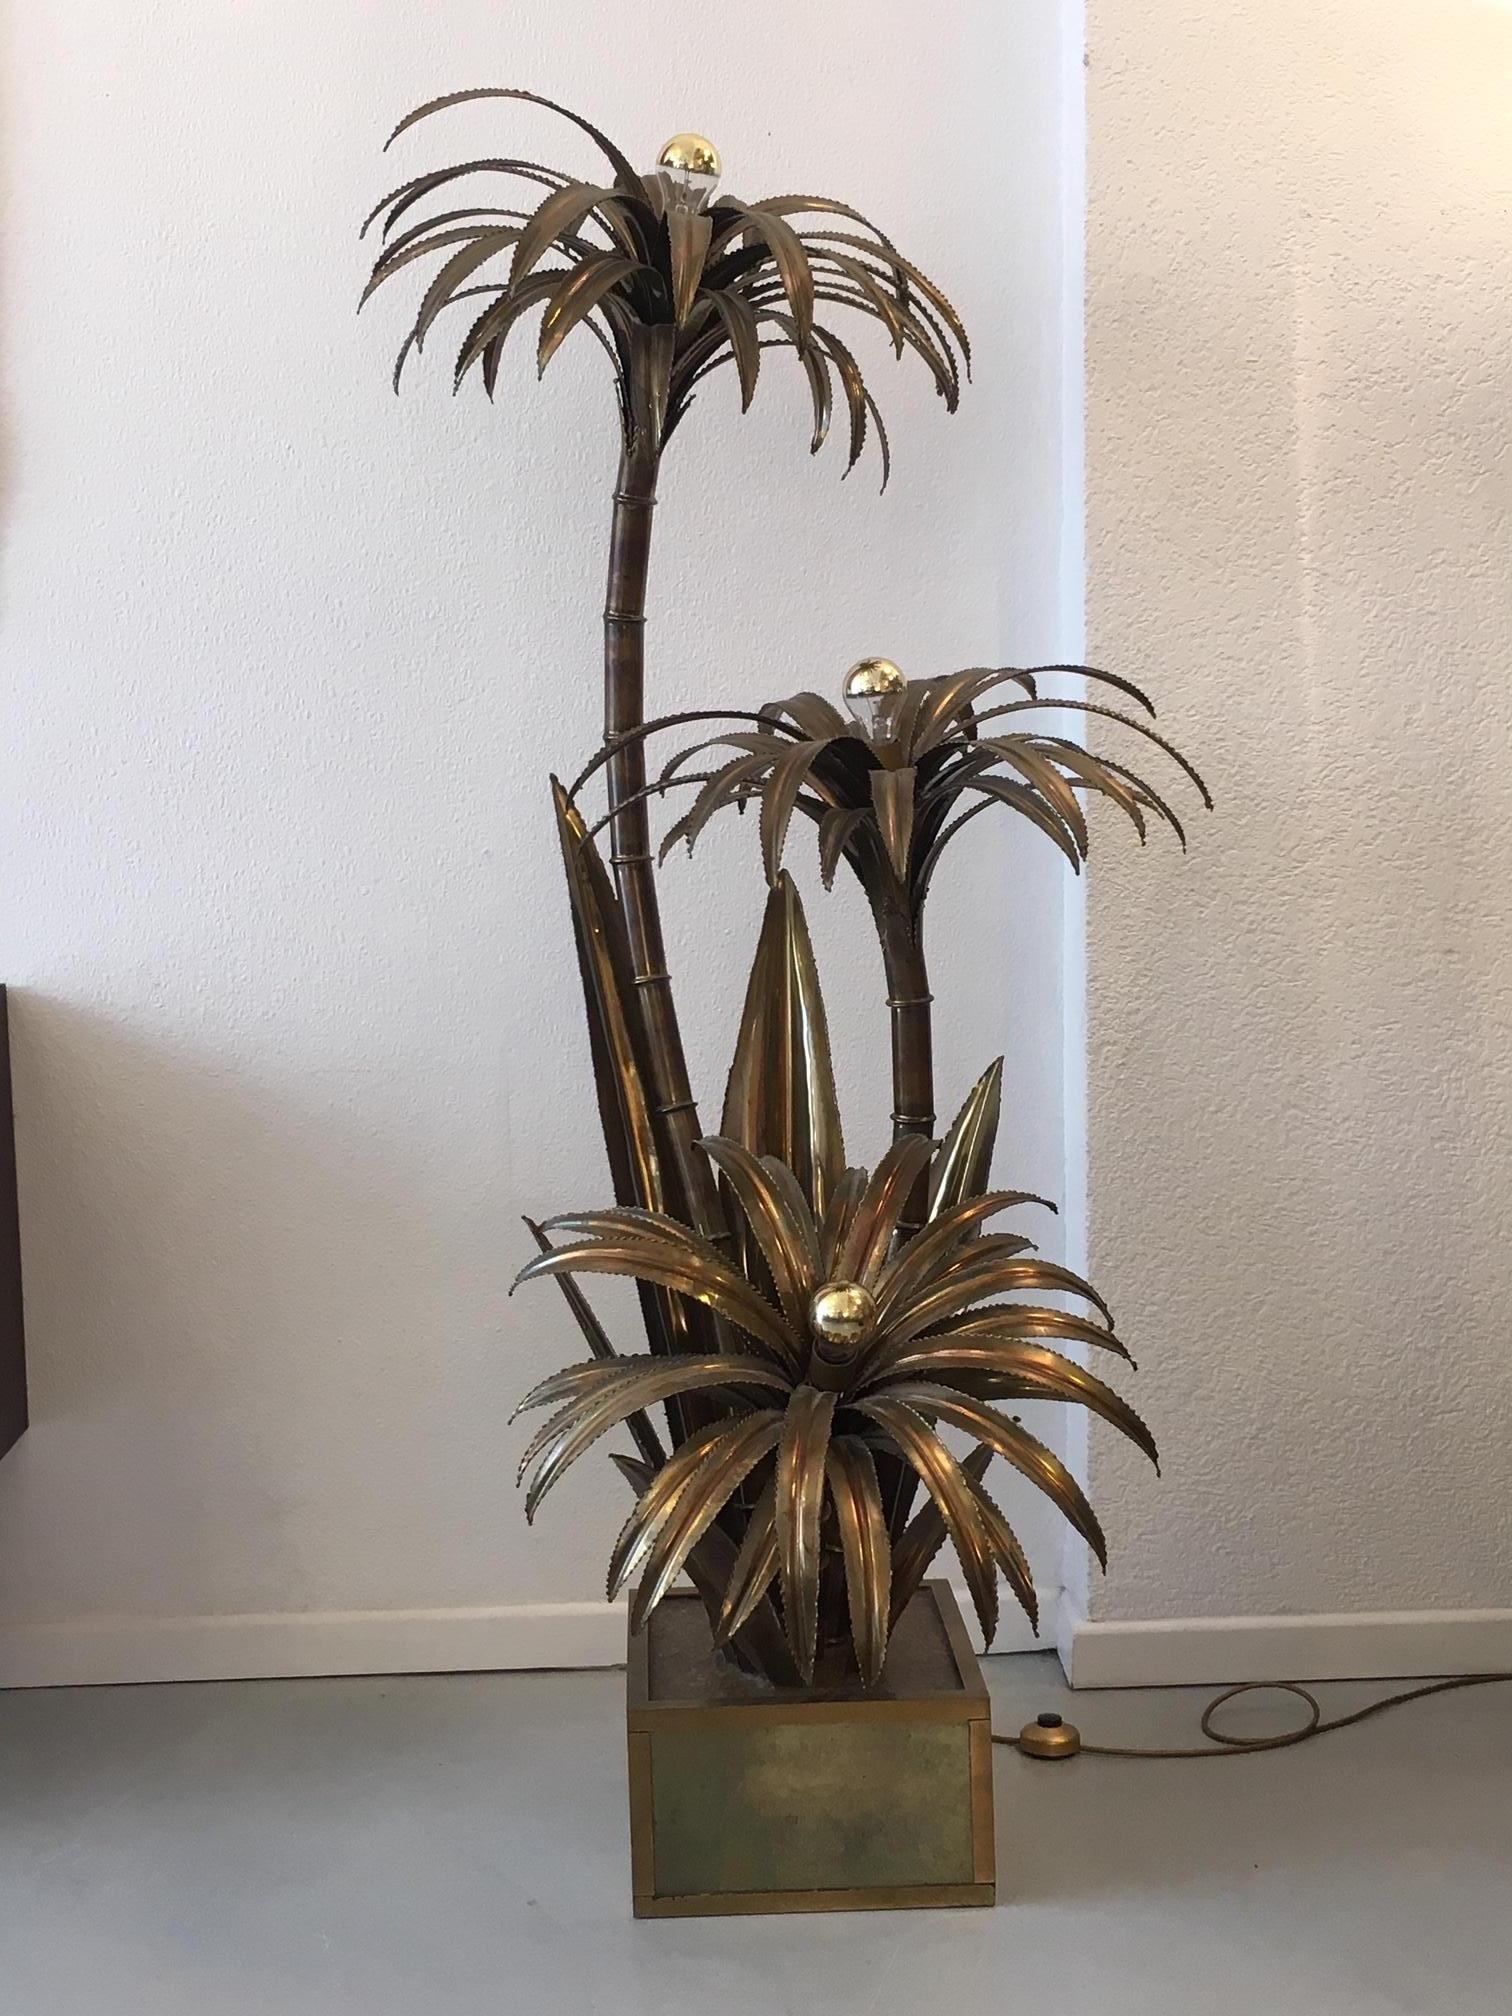 Brass palm tree floor lamp by Maison Jansen, France, circa 1970s
Very good condition, patinated brass.
 